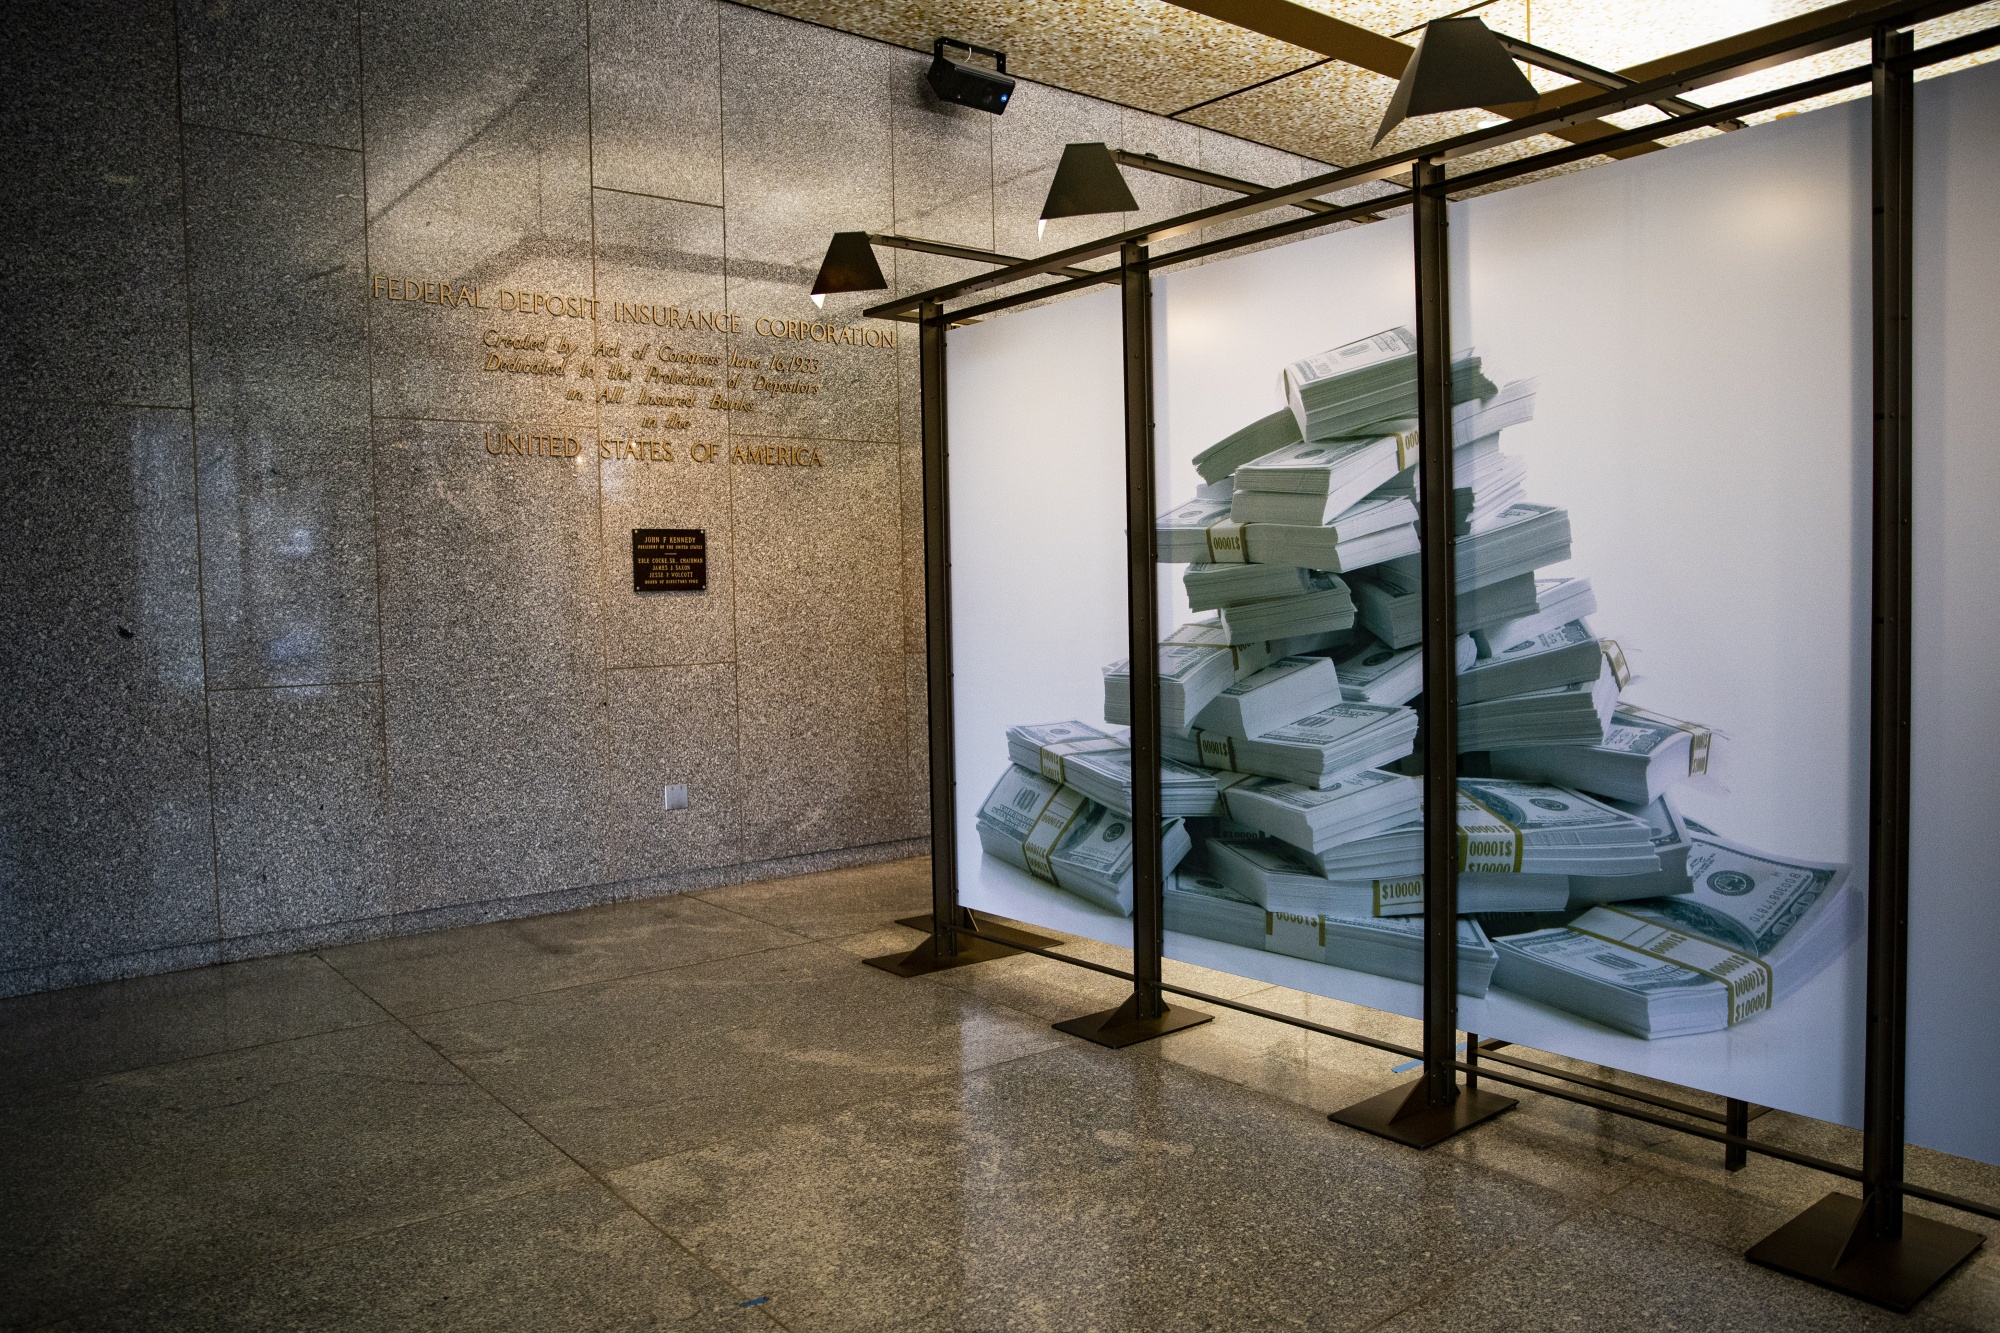 The lobby of the Federal Deposit Insurance Corp. (FDIC) headquarters in Washington, DC.